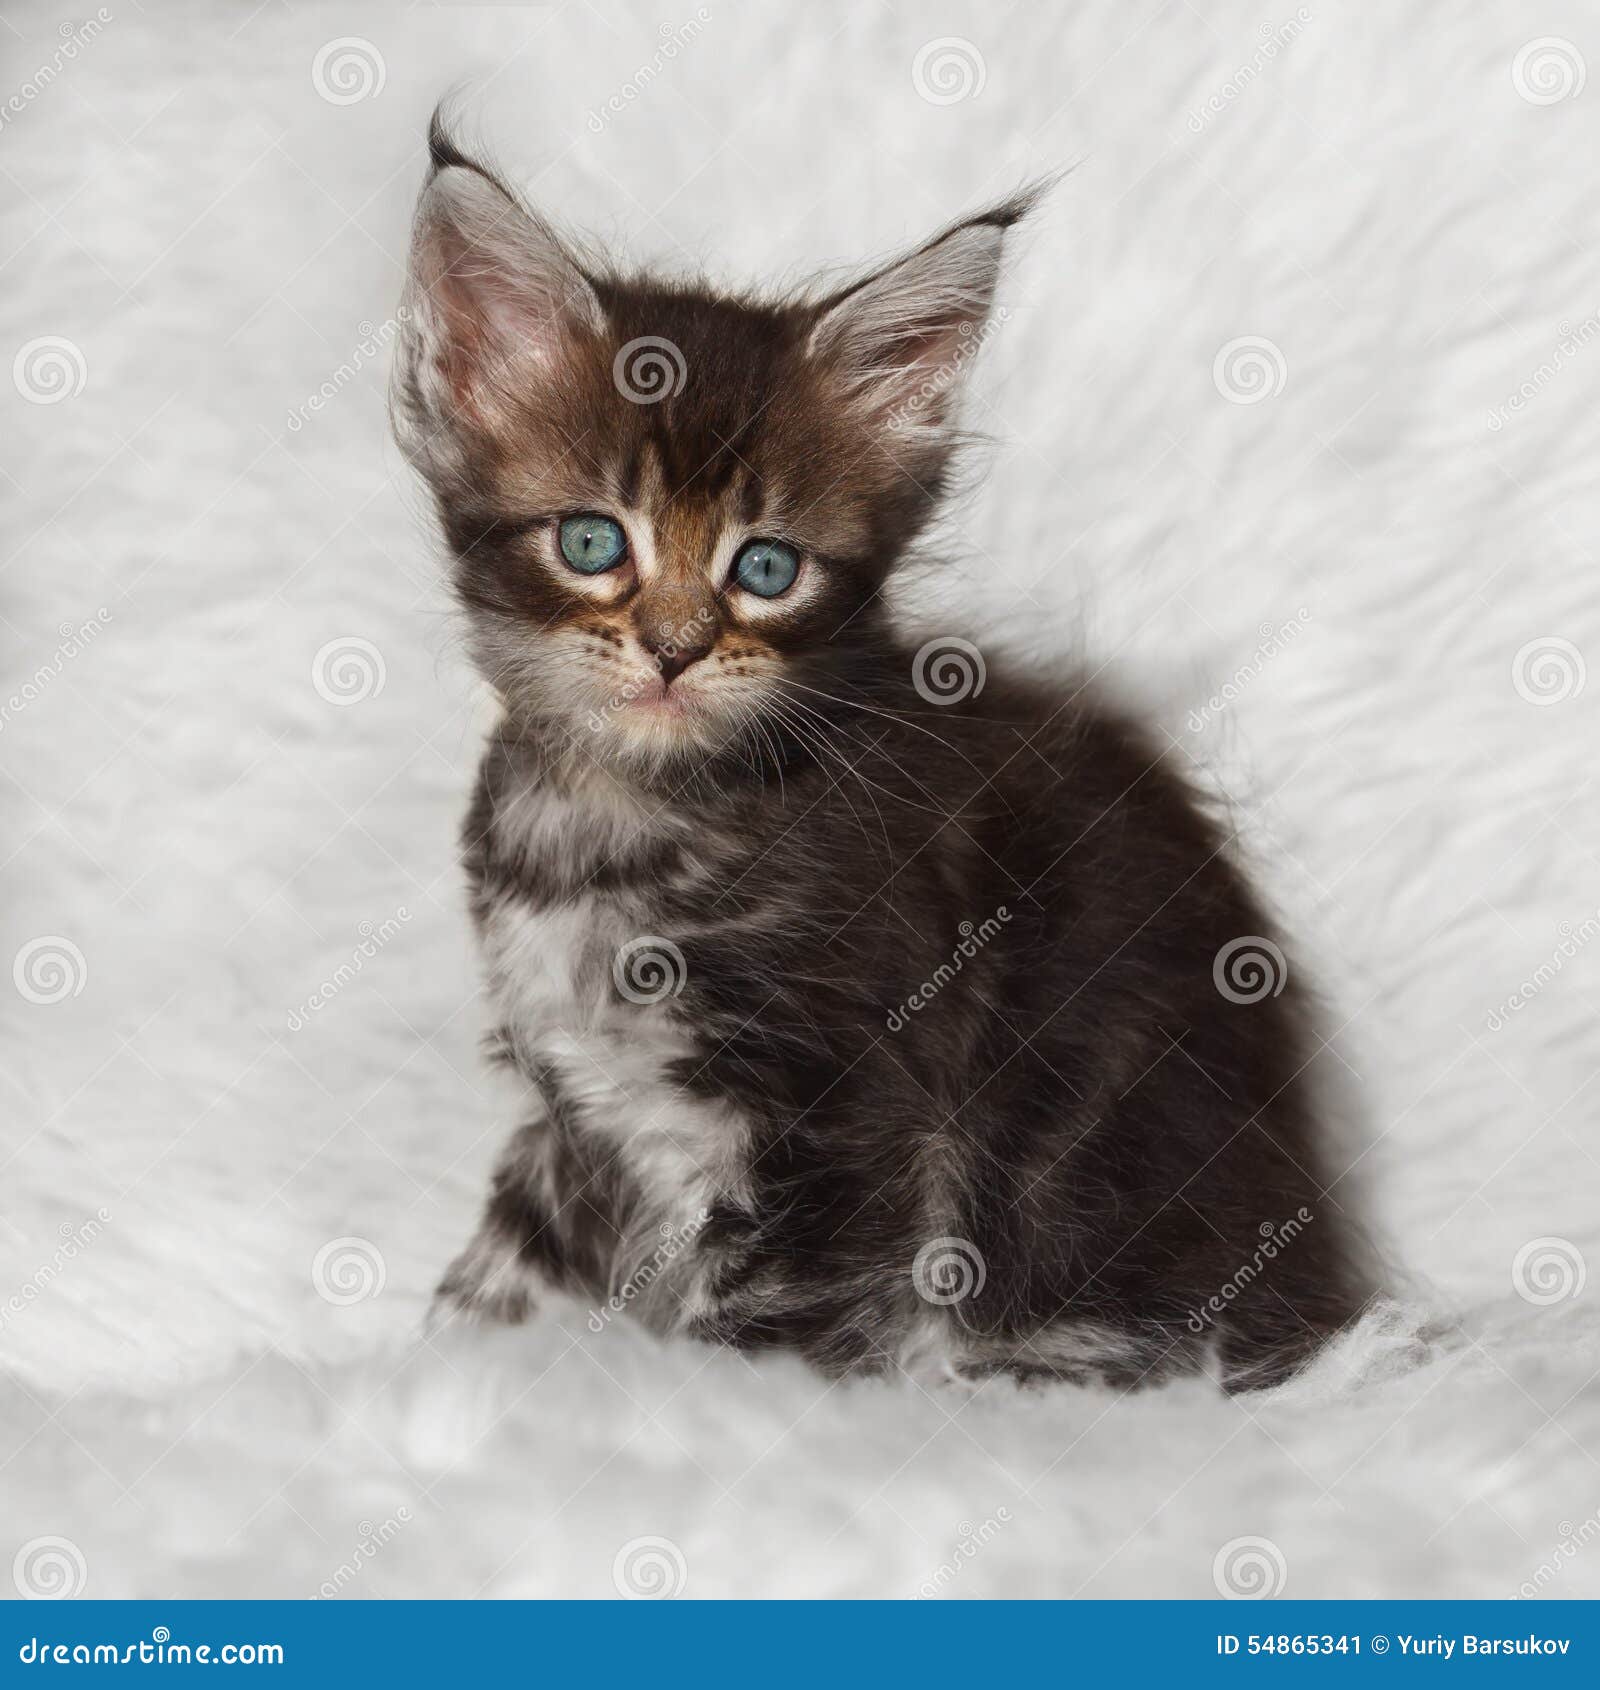 Small Black Tabby Maine Coon Kitten Sitting On White ...